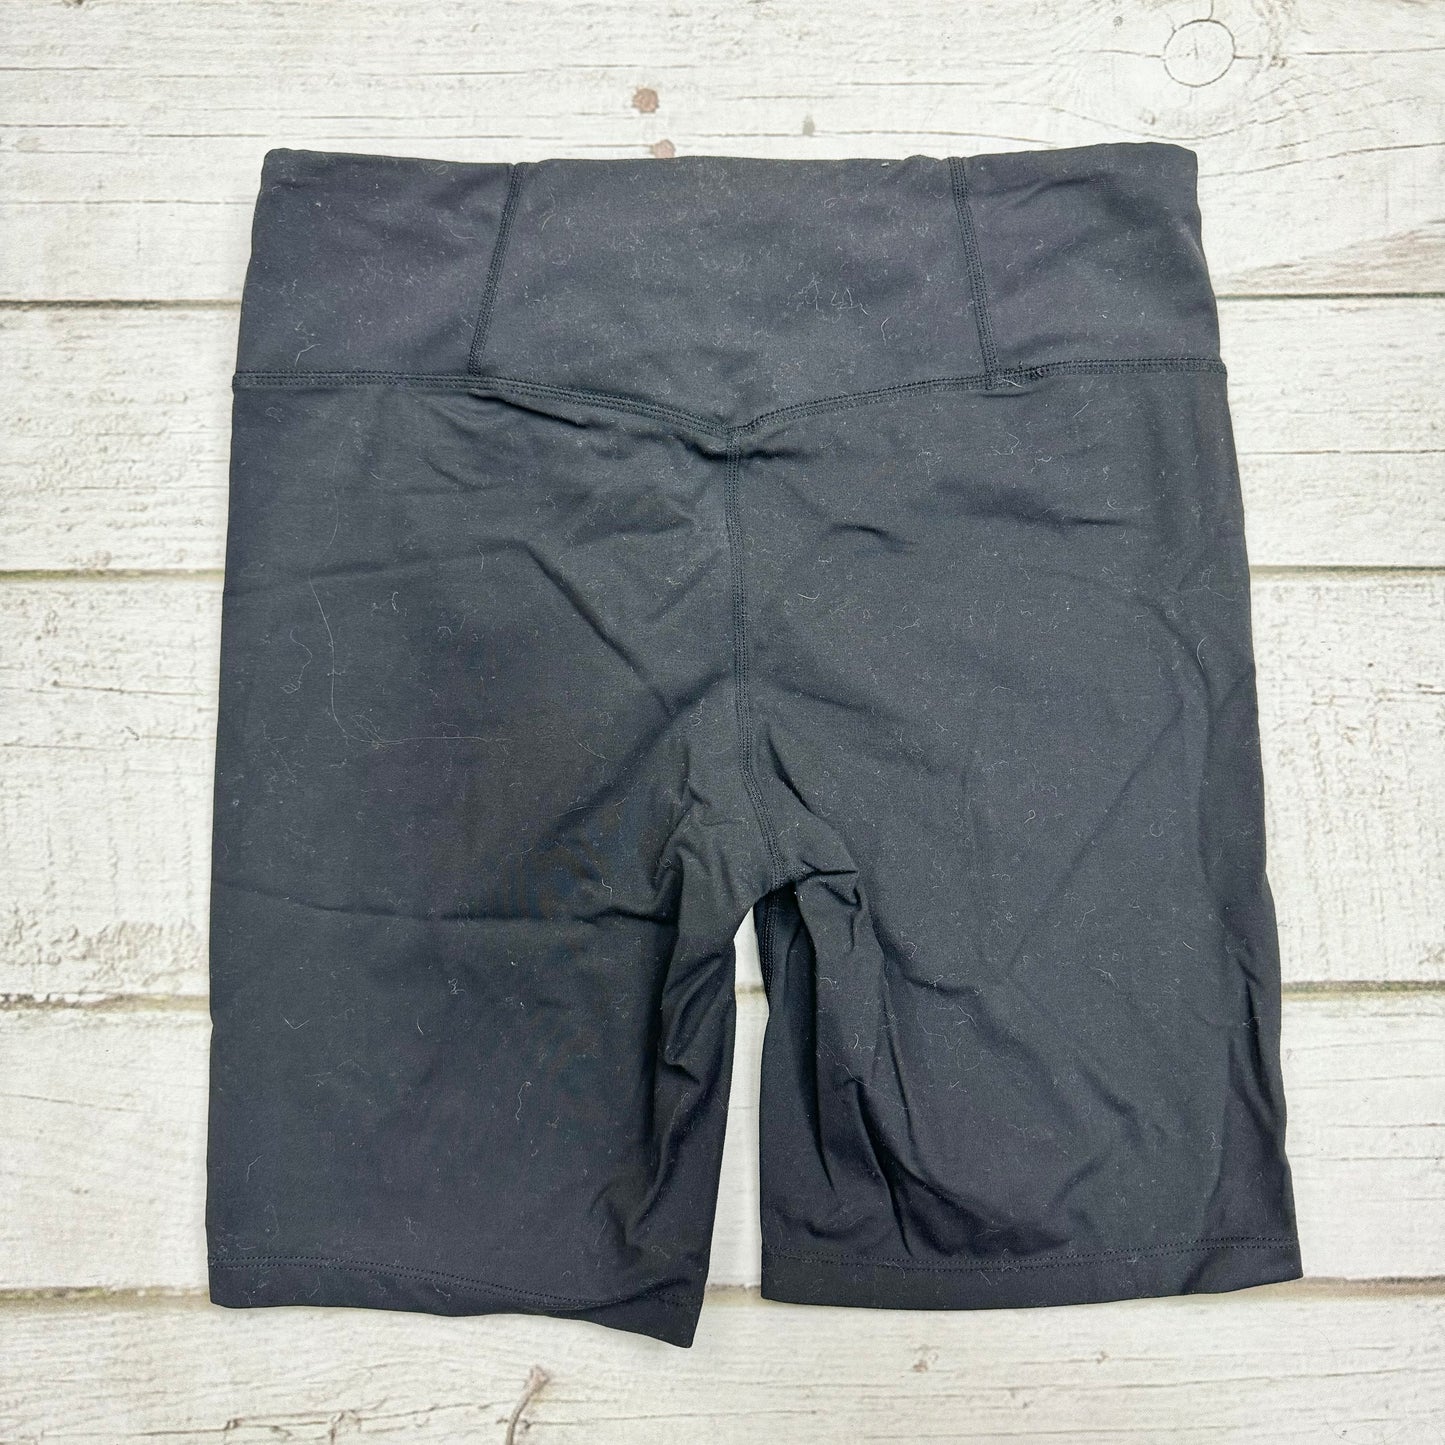 Athletic Shorts By Marine Layer  Size: Xl